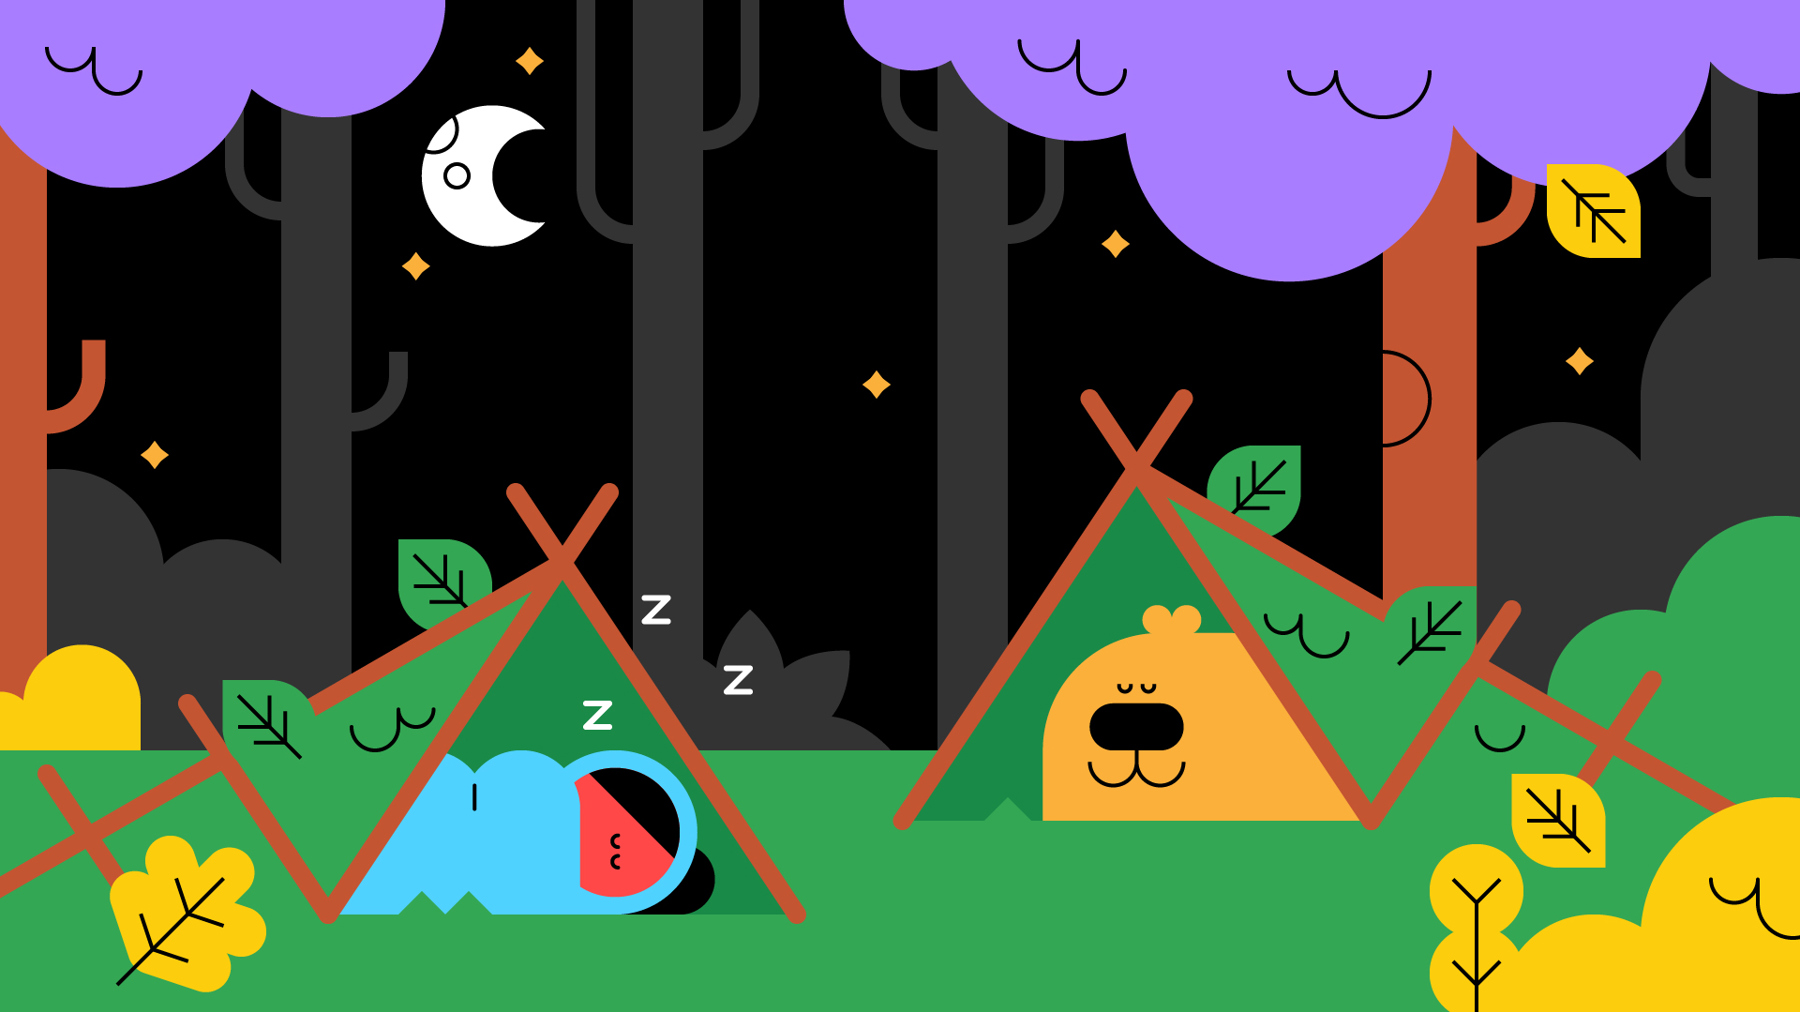 Buddy the dog and a Scout sleeping in tents under the stars.